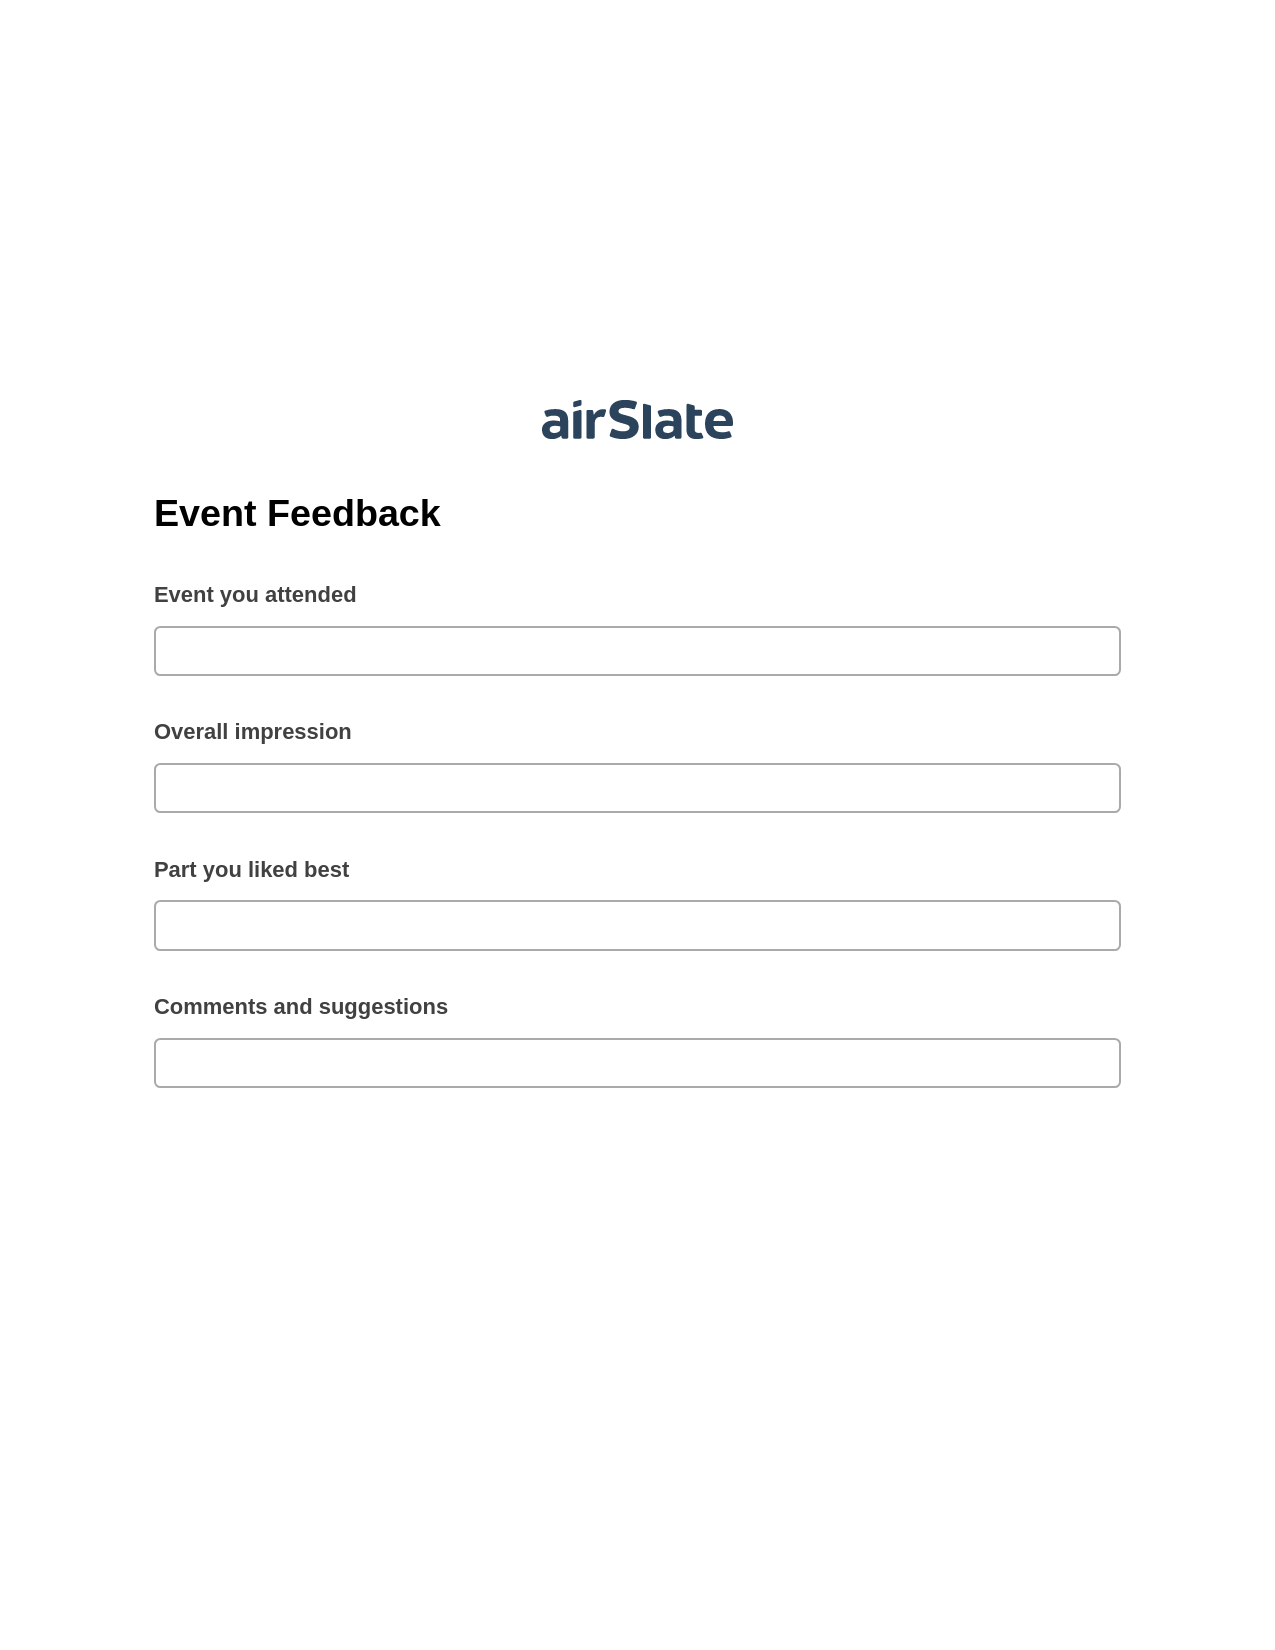 Event Feedback Pre-fill from CSV File Bot, Open as Role Bot, Export to NetSuite Record Bot